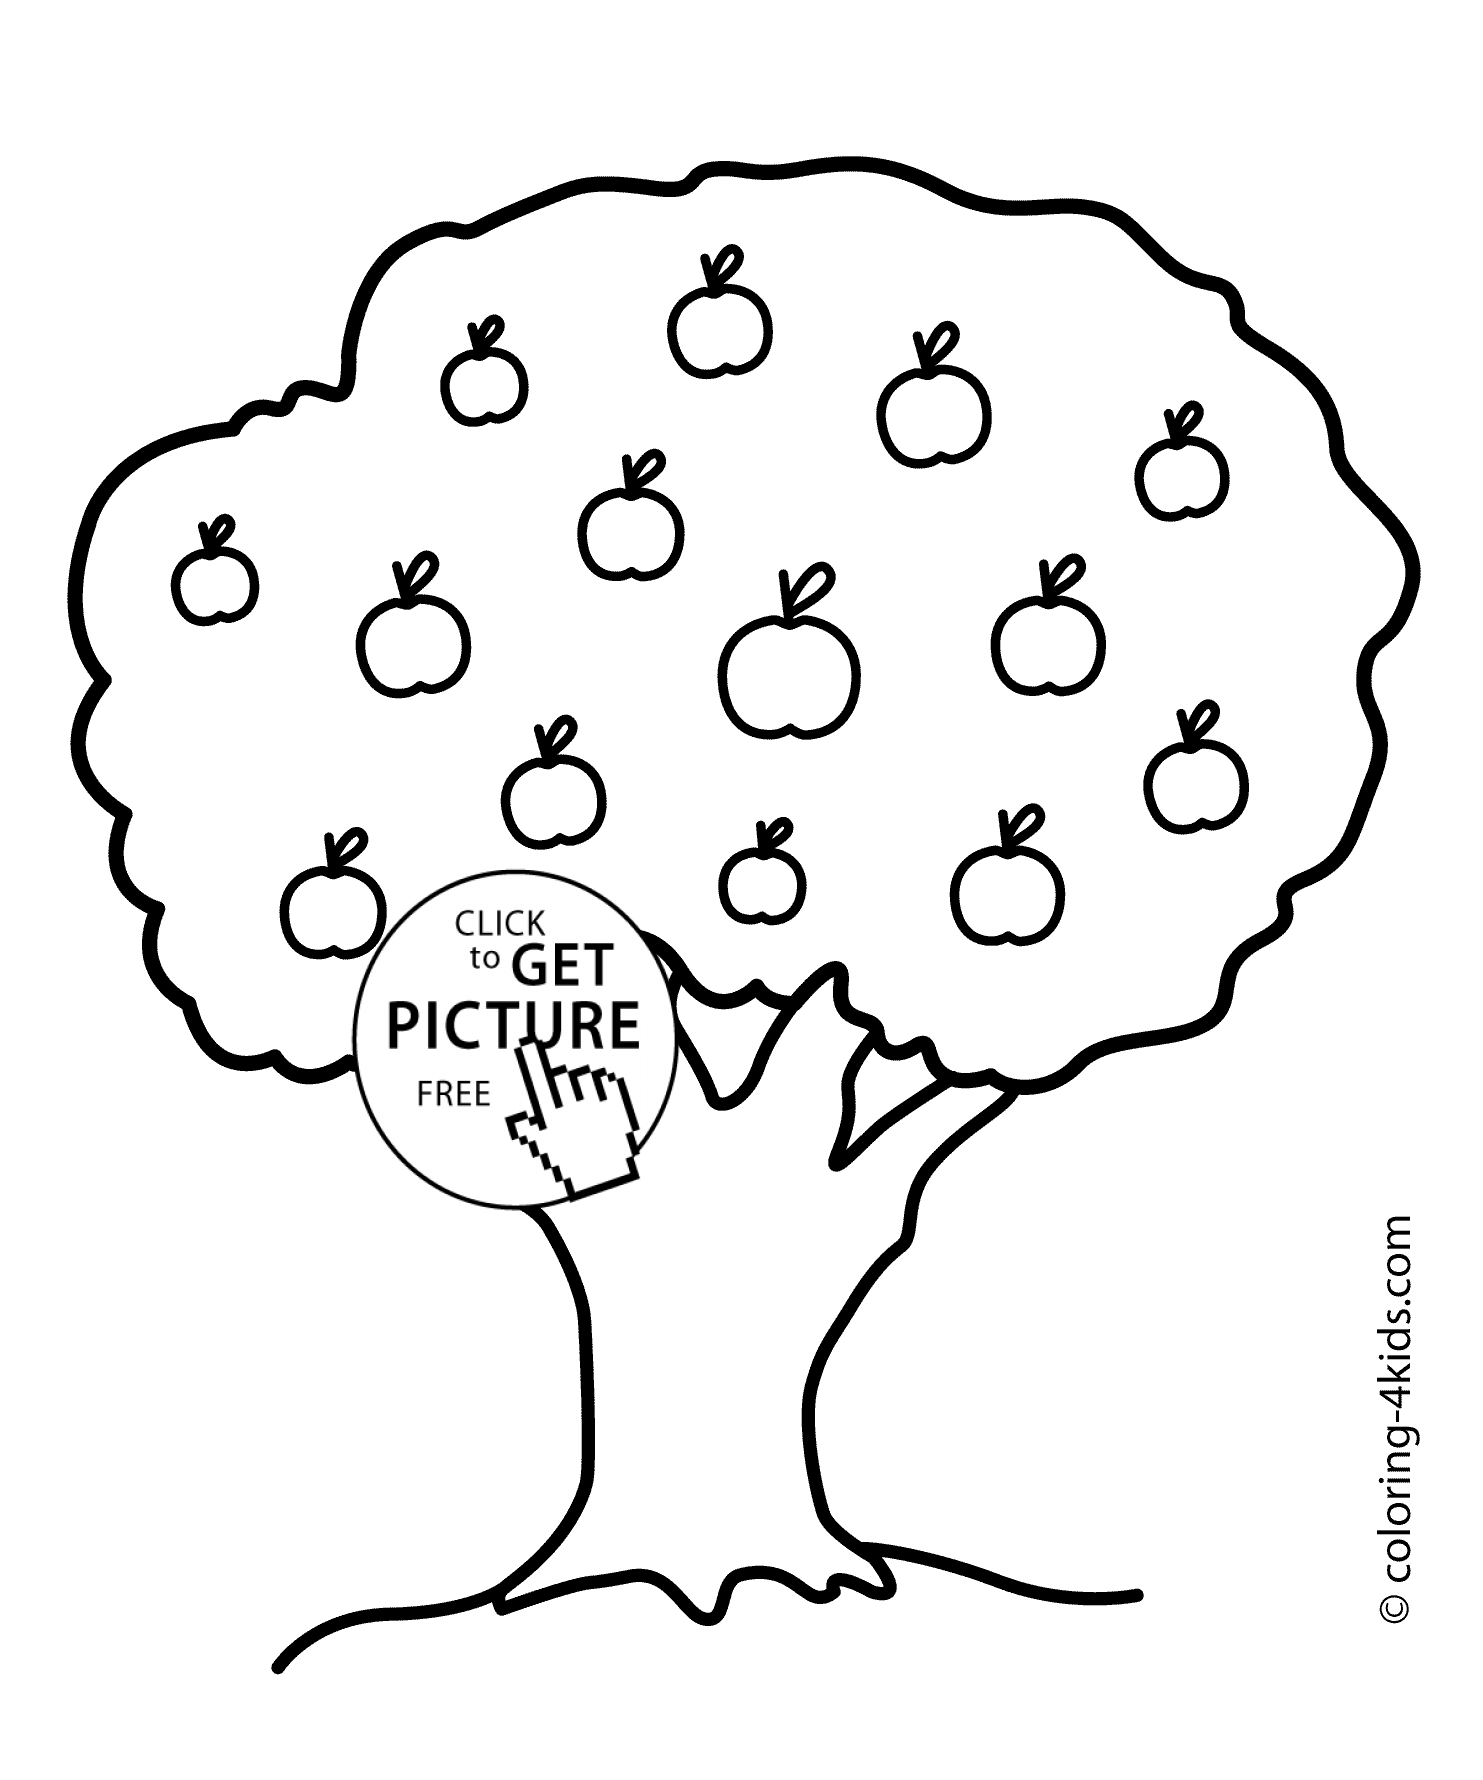 Nature apple tree coloring page for kids, printable free